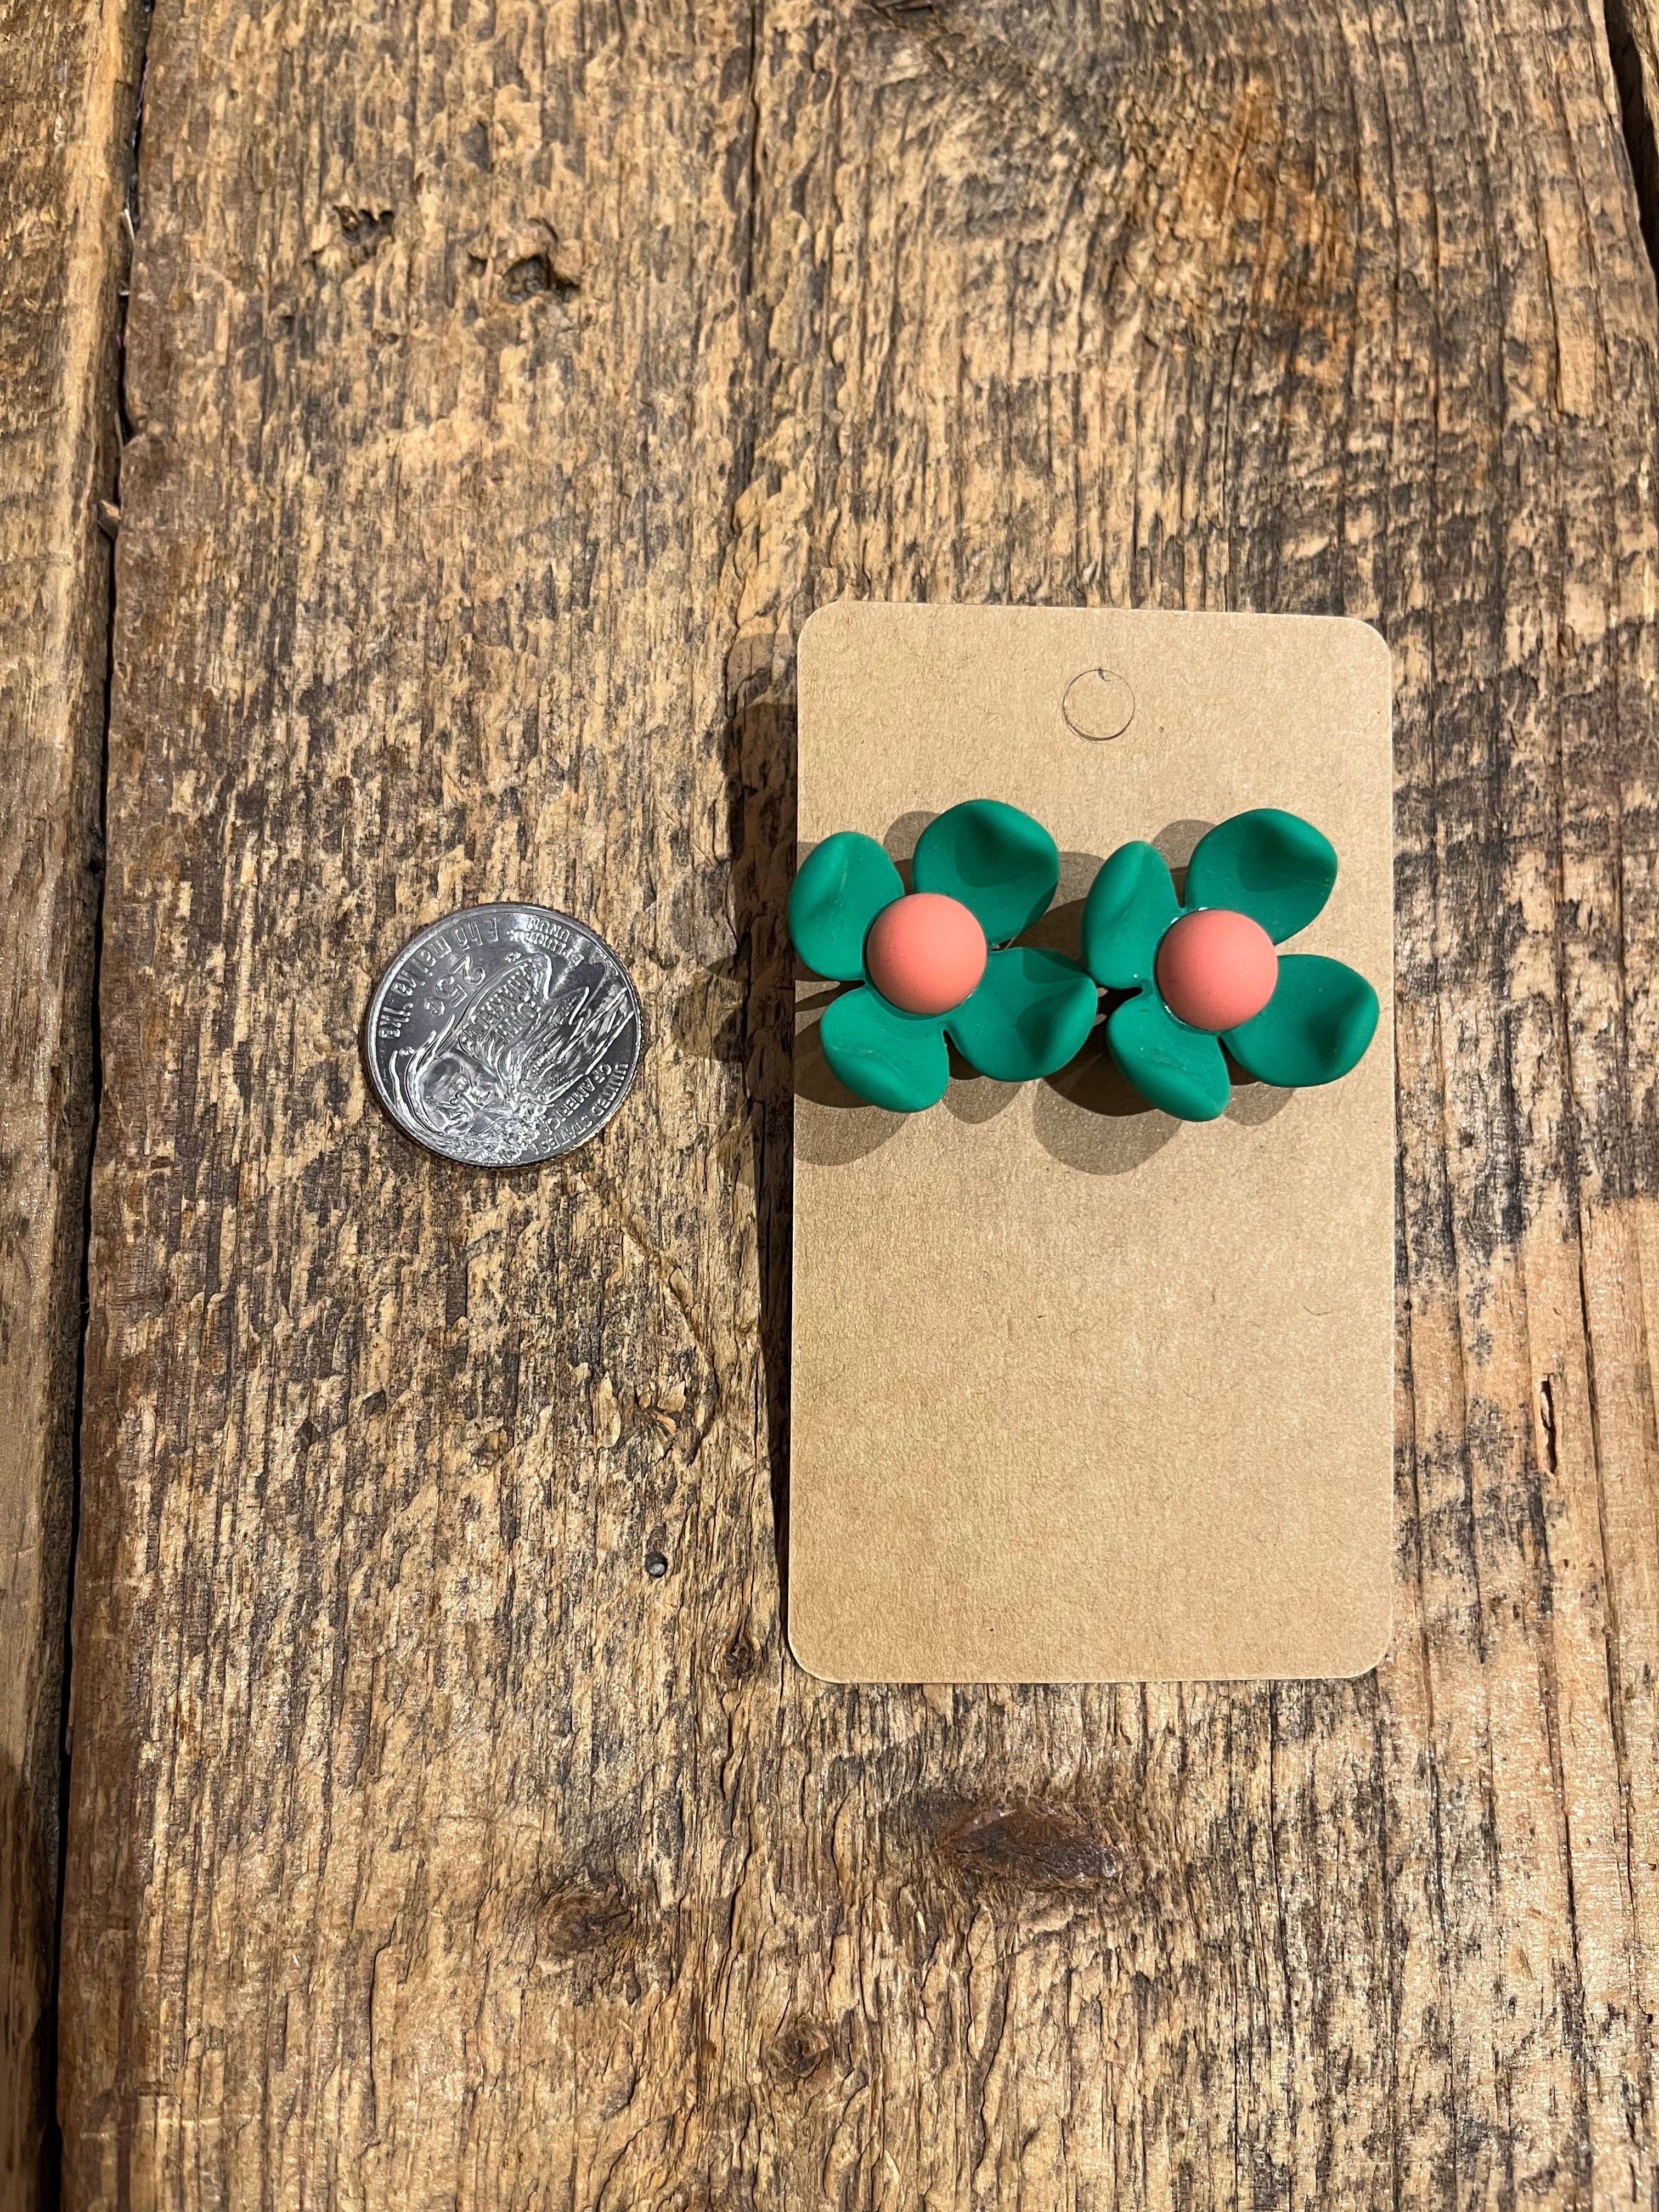 Clay Floral Stud Earrings in Green and Peach